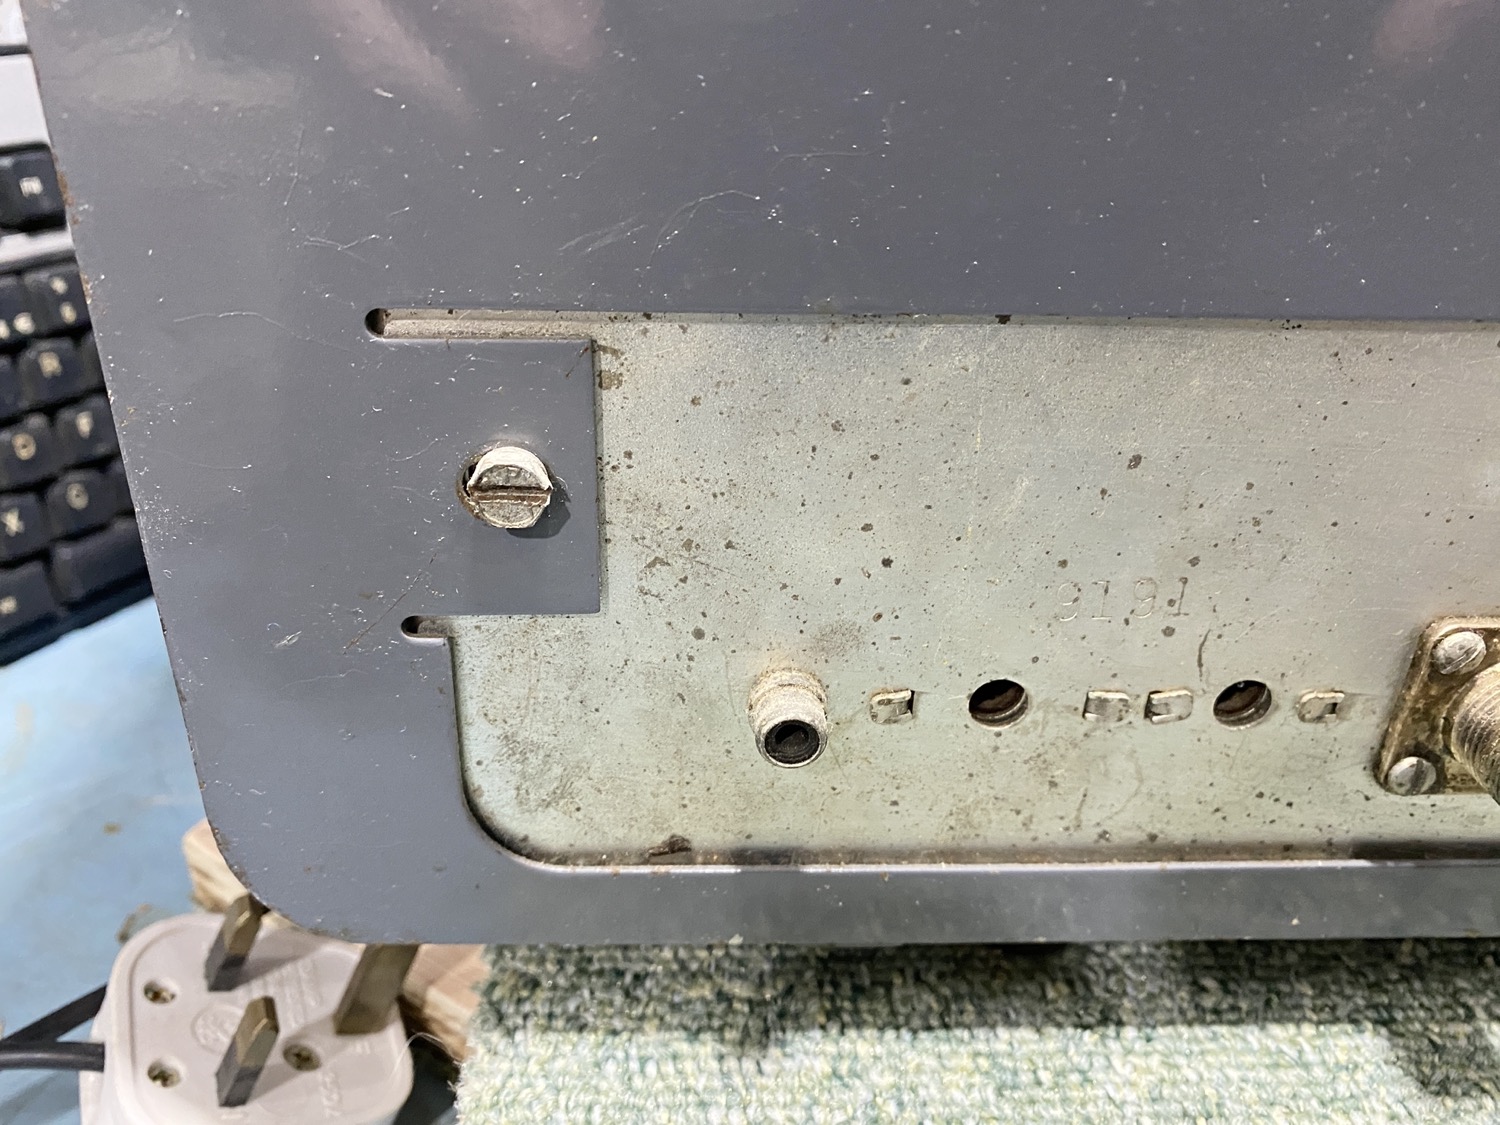 From the look at the two old screws that hold the chassis in place, it looks as though it has not been played with too much.